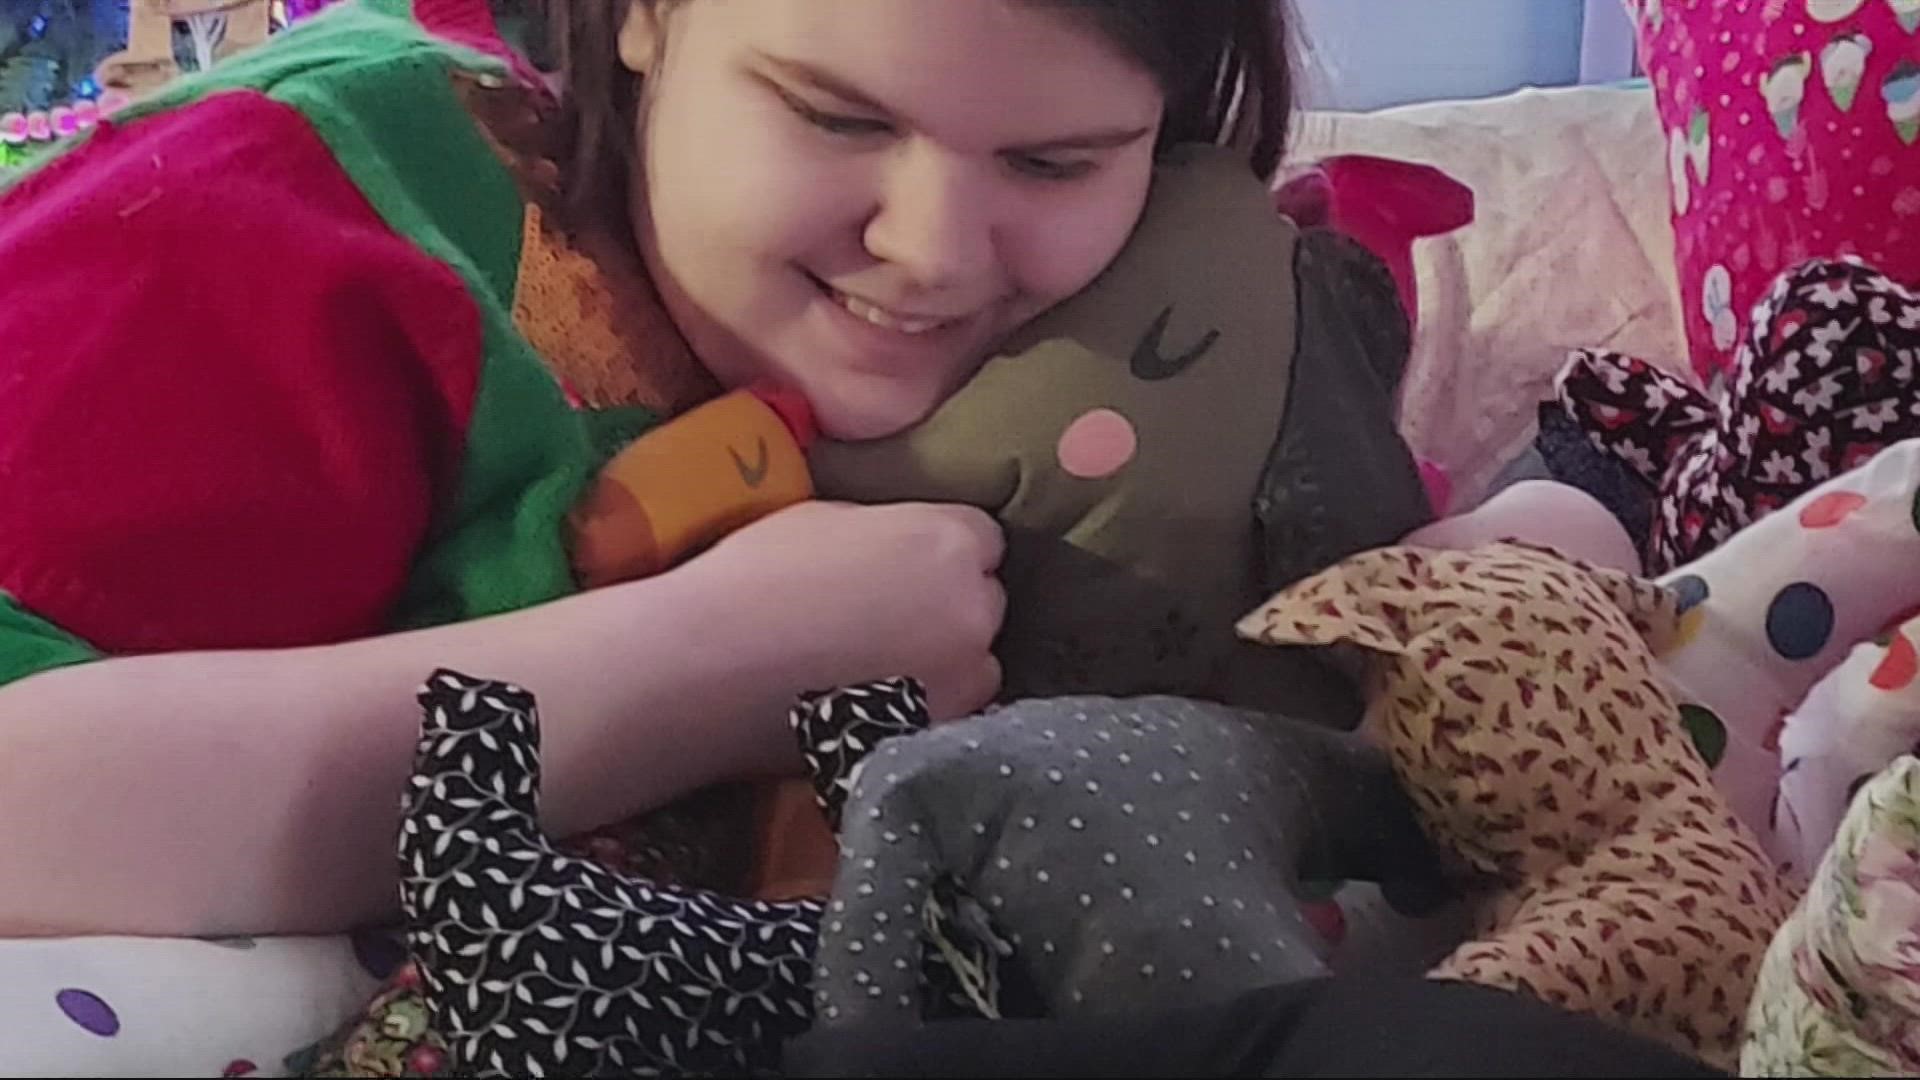 Lucy Crouse has made an annual tradition of sewing stuffed animals and quilts as holiday gifts for hospital patients.